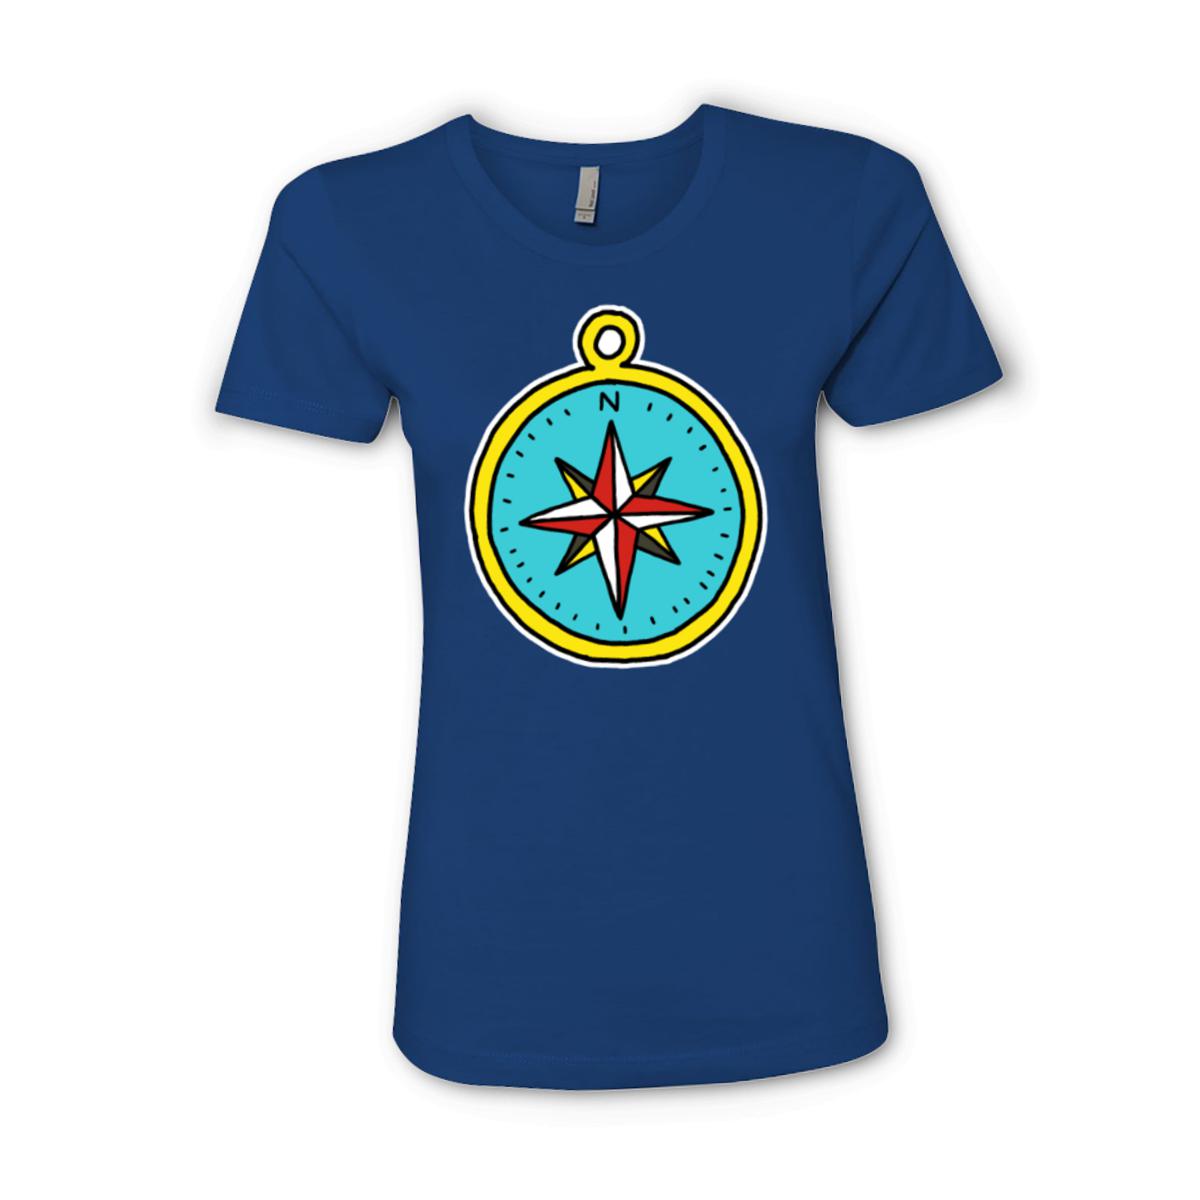 American Traditional Compass Ladies' Boyfriend Tee Double Extra Large royal-blue